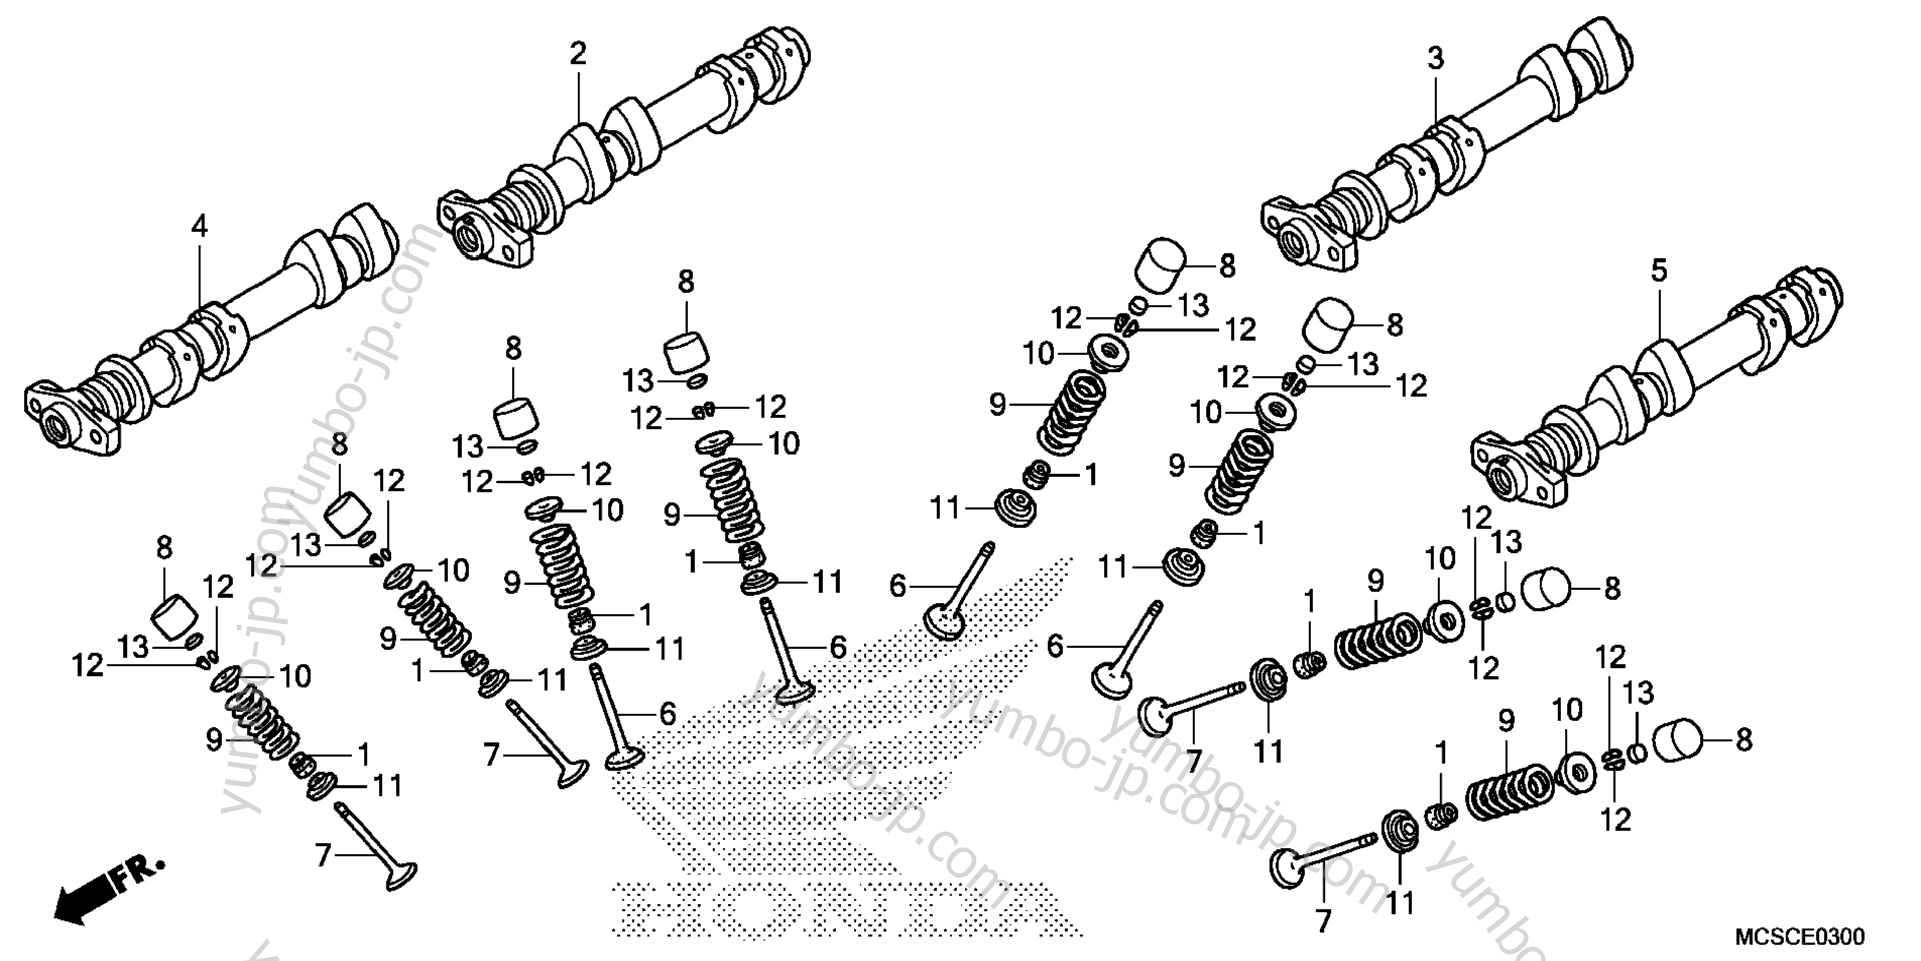 CAMSHAFT / VALVE for motorcycles HONDA ST1300A AC 2013 year